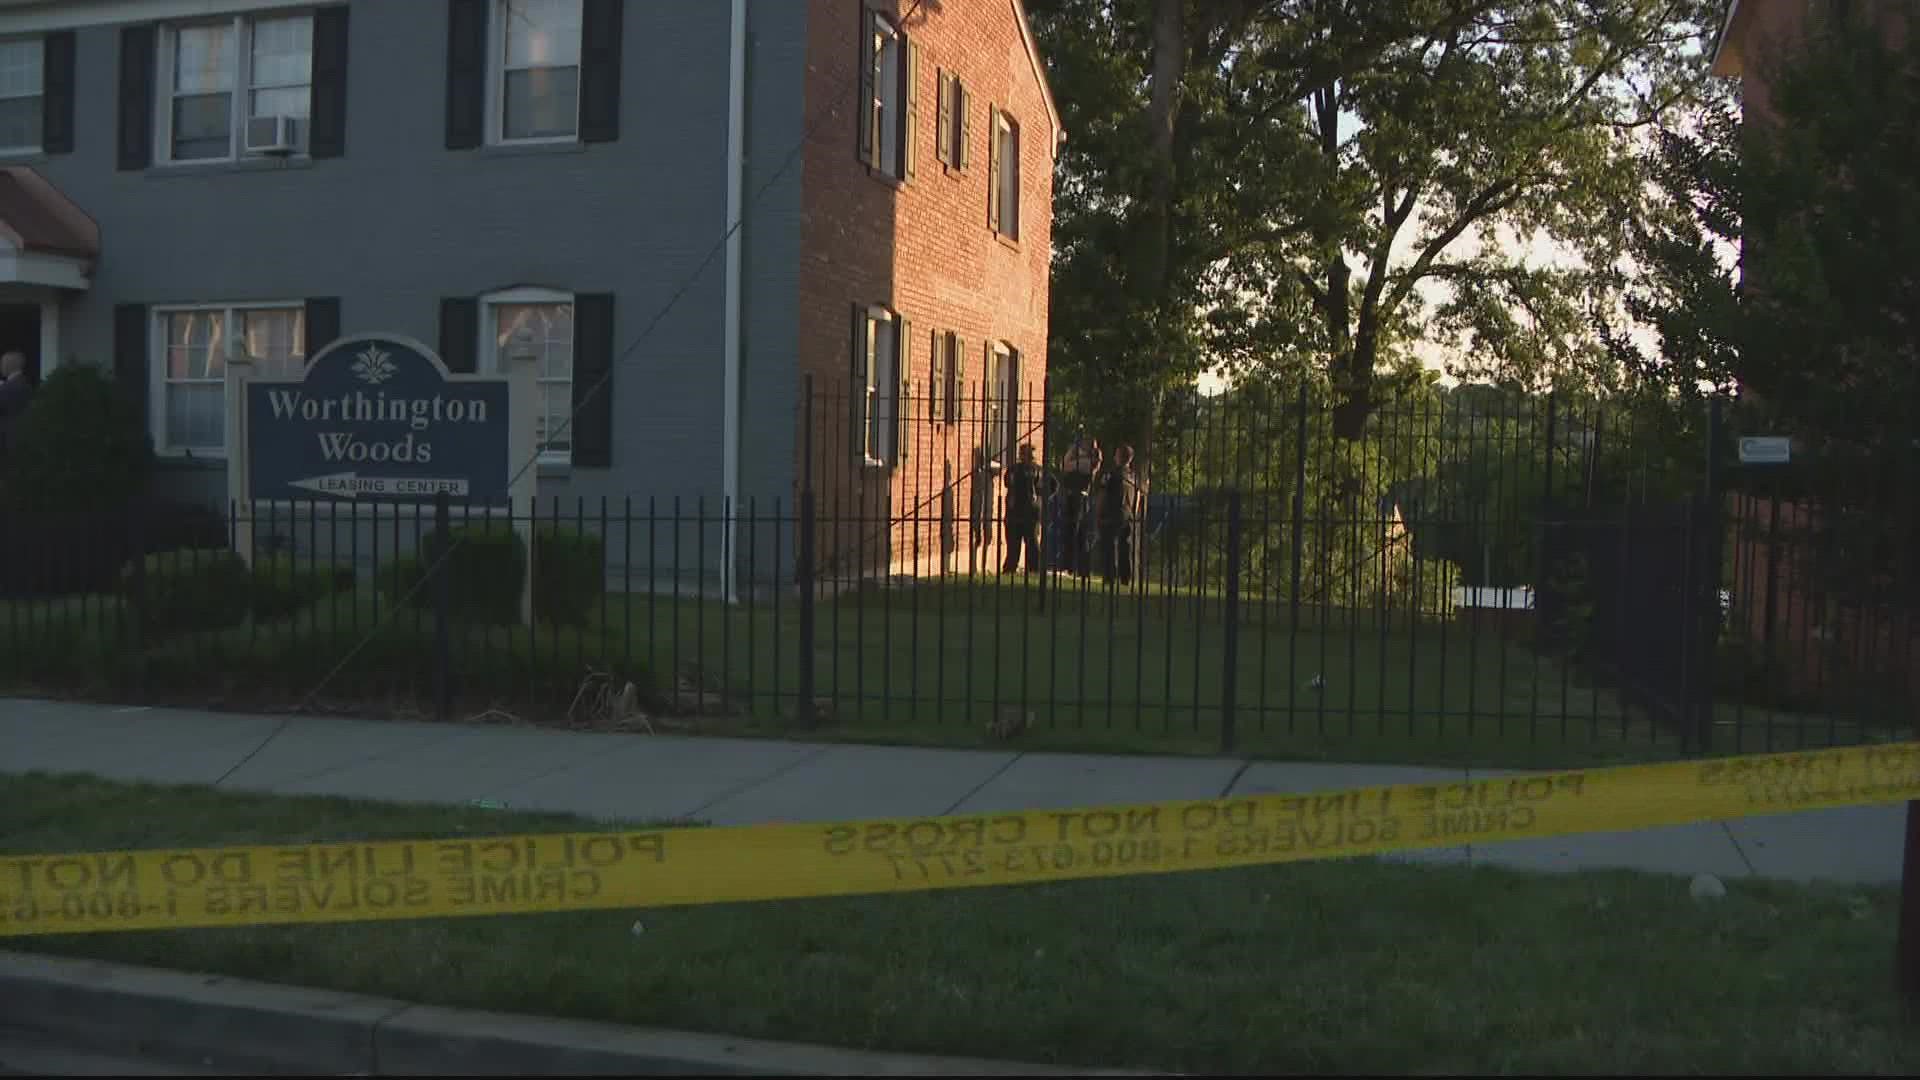 A 16-year-old girl was shot and killed in the 4400 block of 3rd Street, SE.